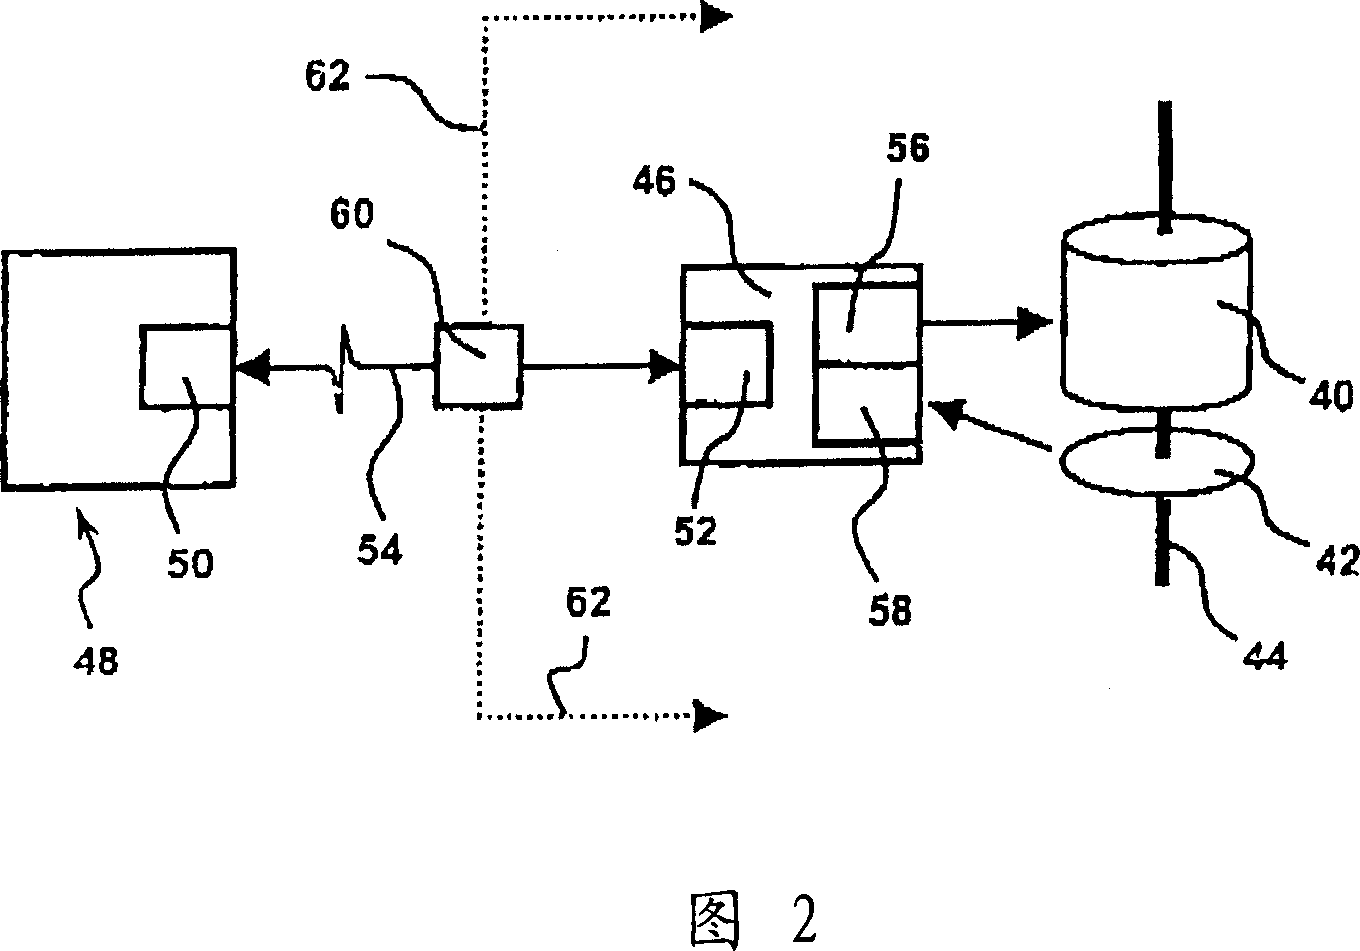 Communication network based on master/slave architecture for connecting sensors and actuators